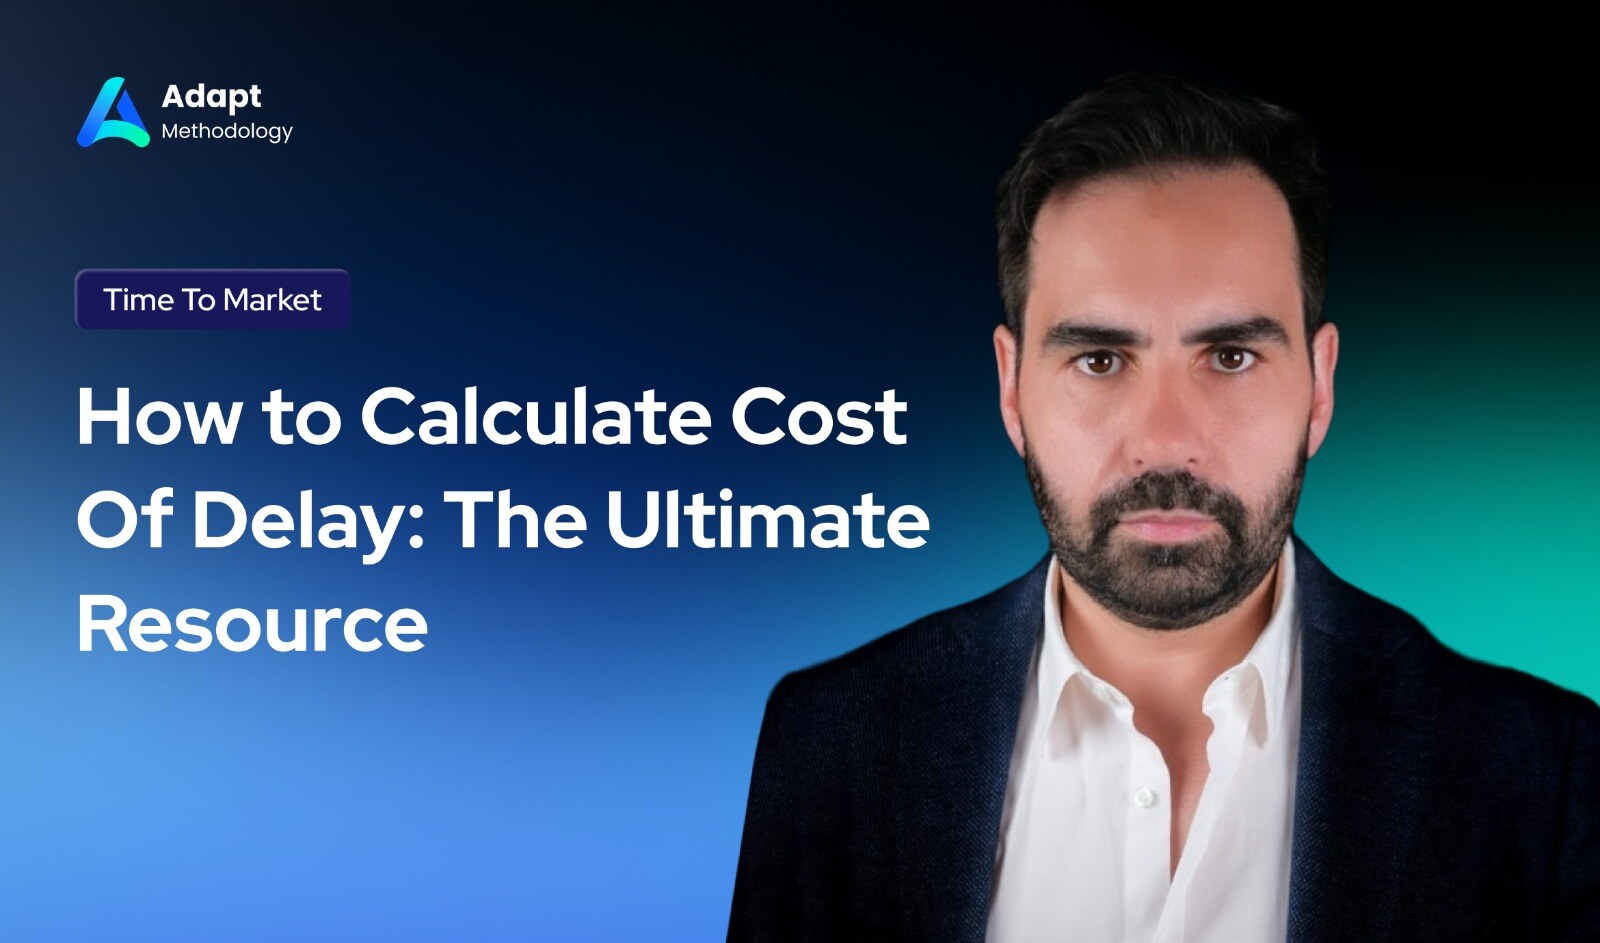 How to Calculate Cost of Delay